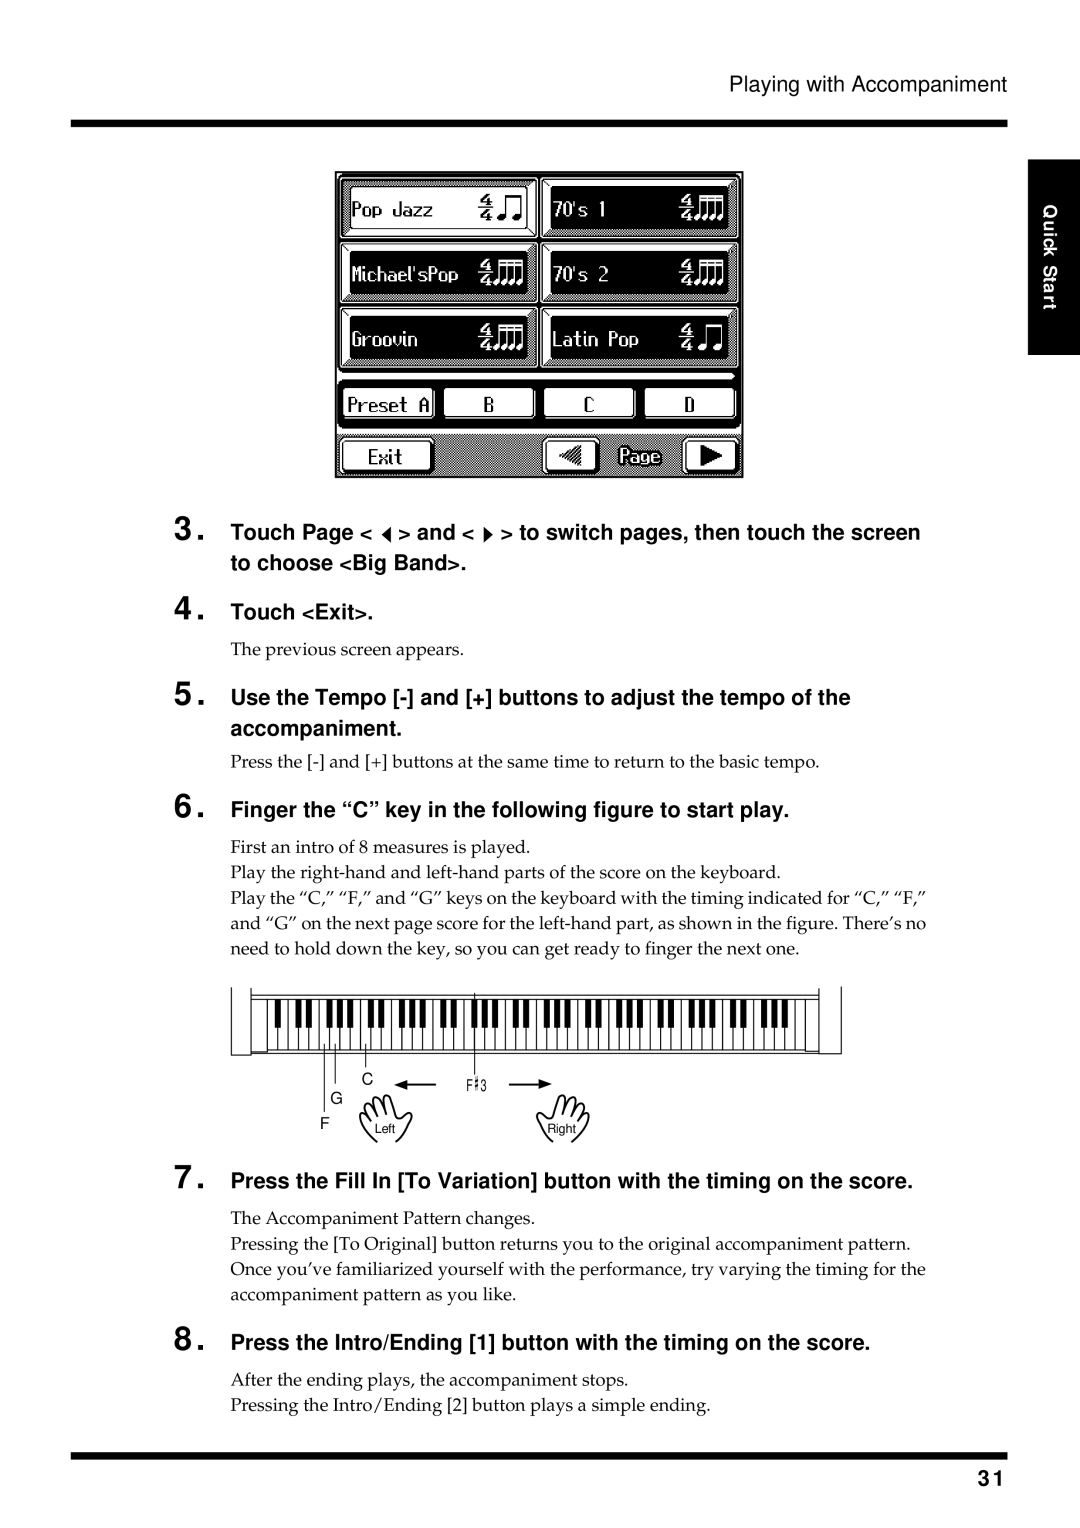 Roland KF-90 owner manual Finger the C key in the following figure to start play 